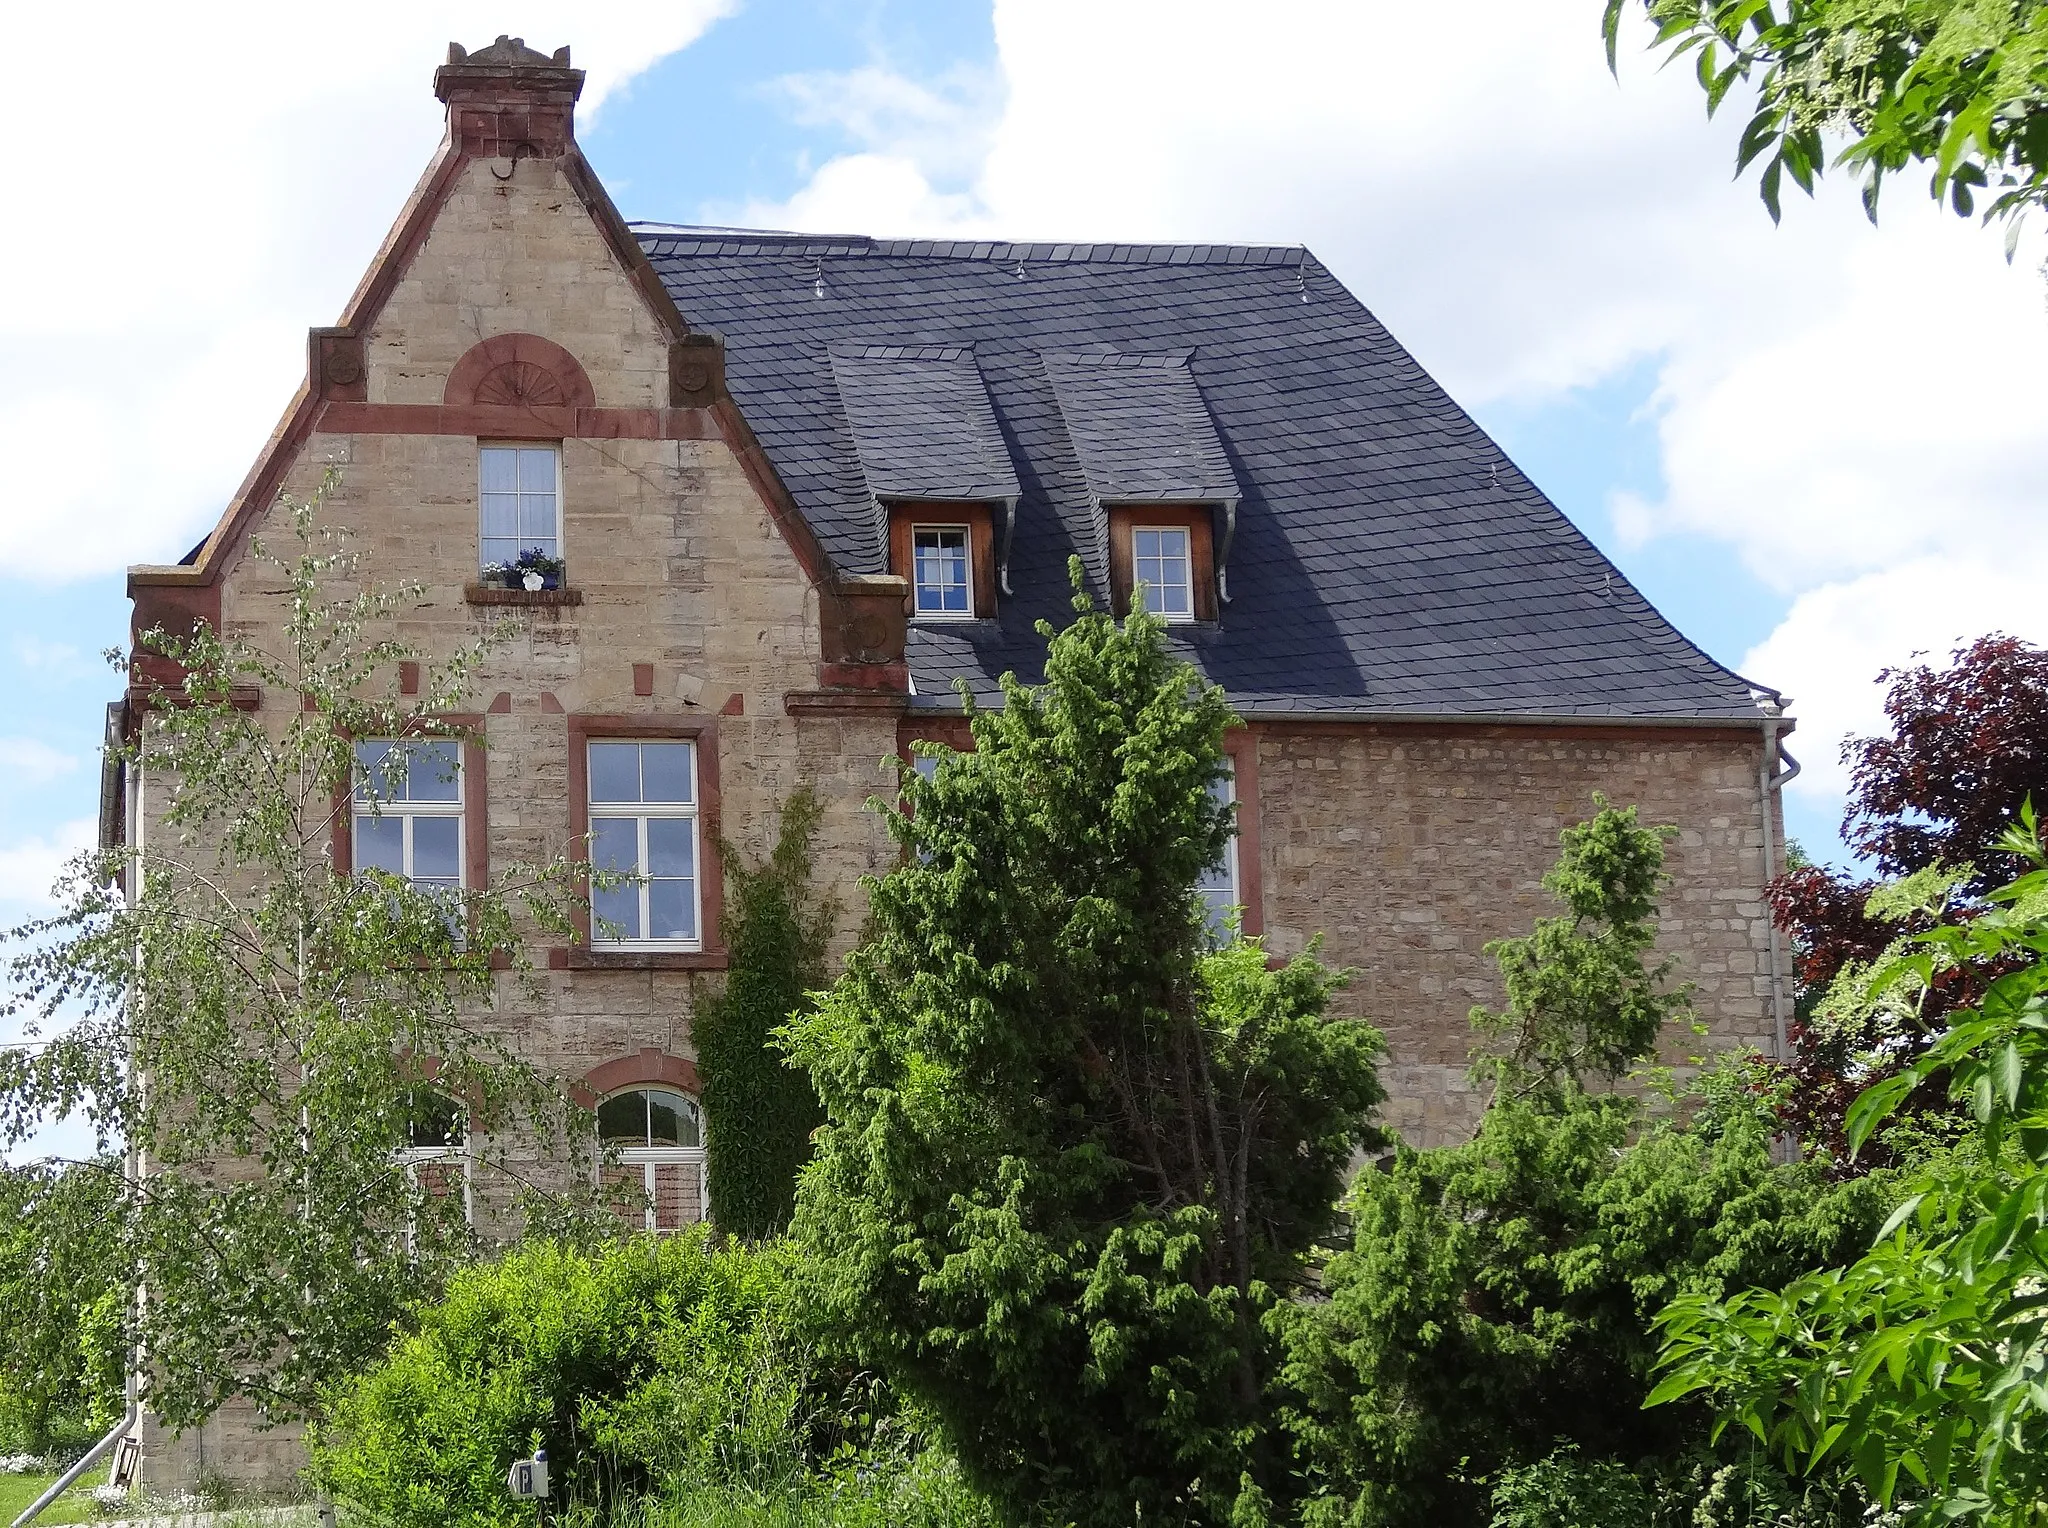 Photo showing: Good house in Mohrenthal, Rittersdorf, Thuringia, Germany